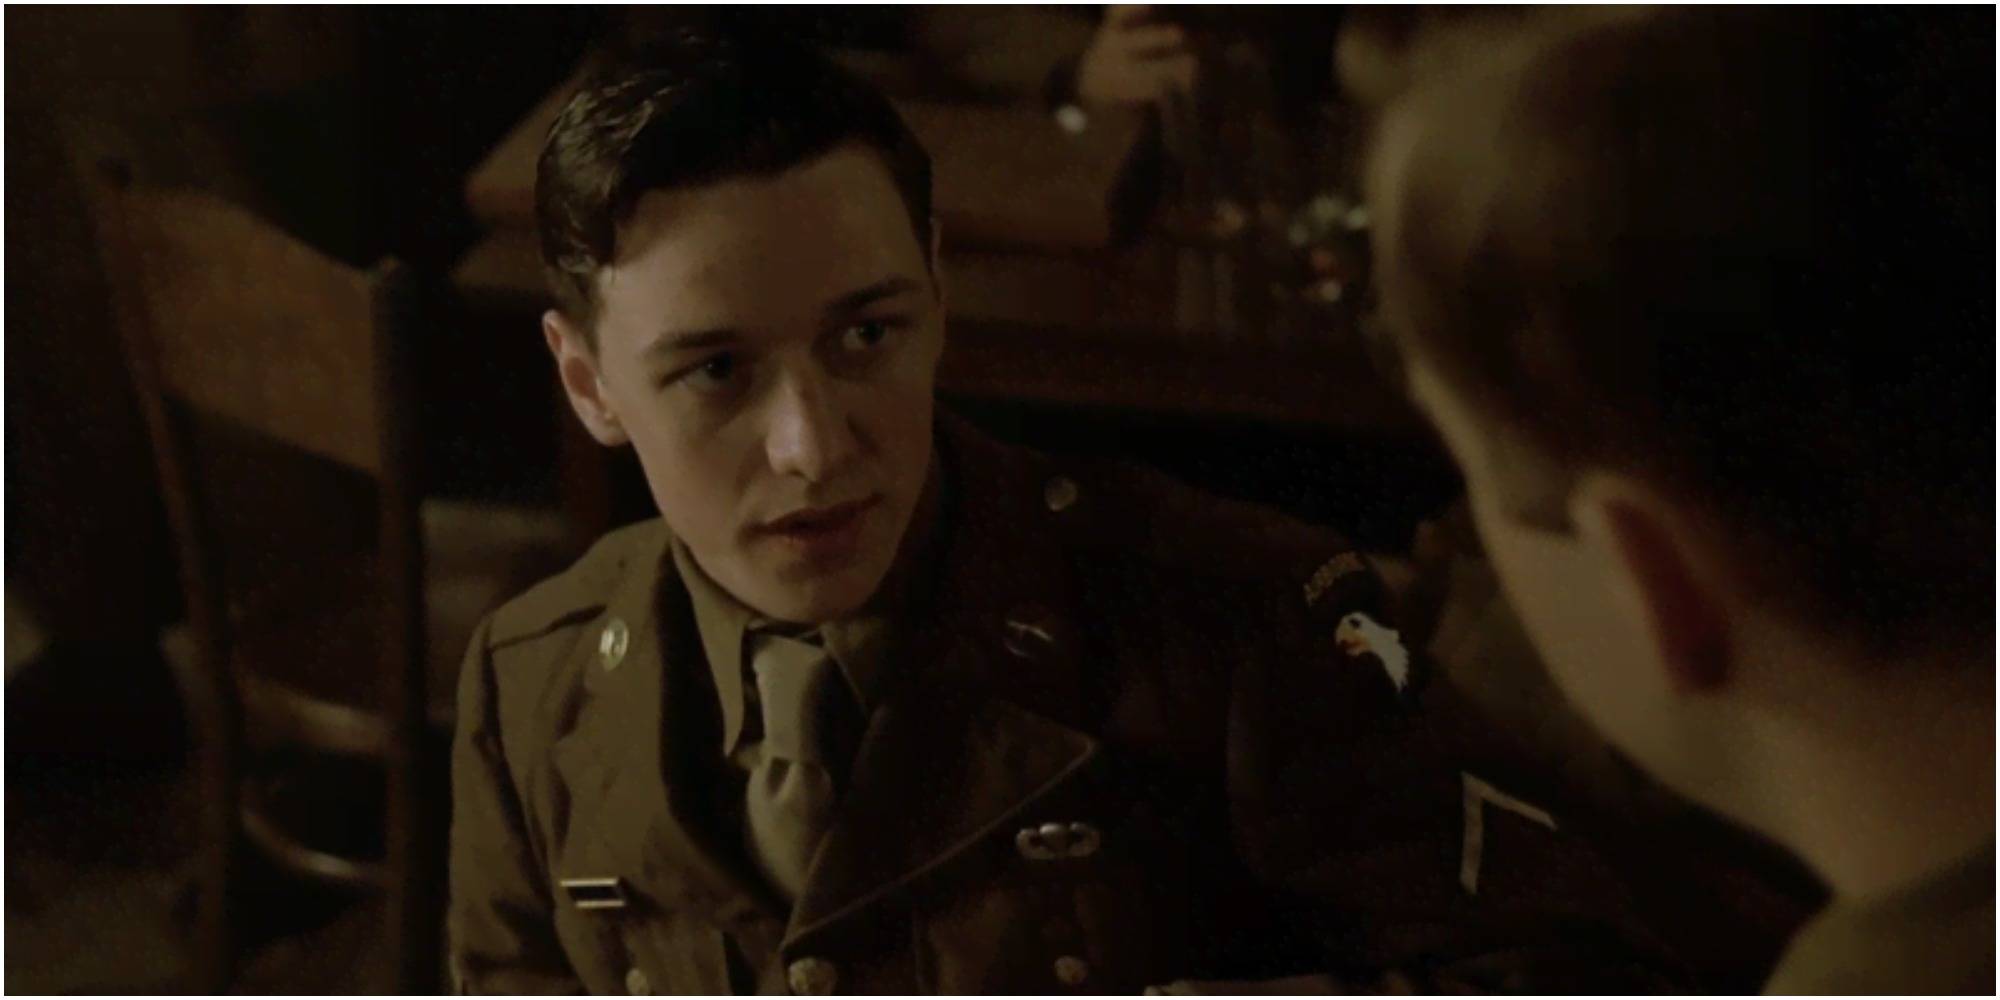 james mcavoy, in the Band of Brothers cast talks during a scene of the show